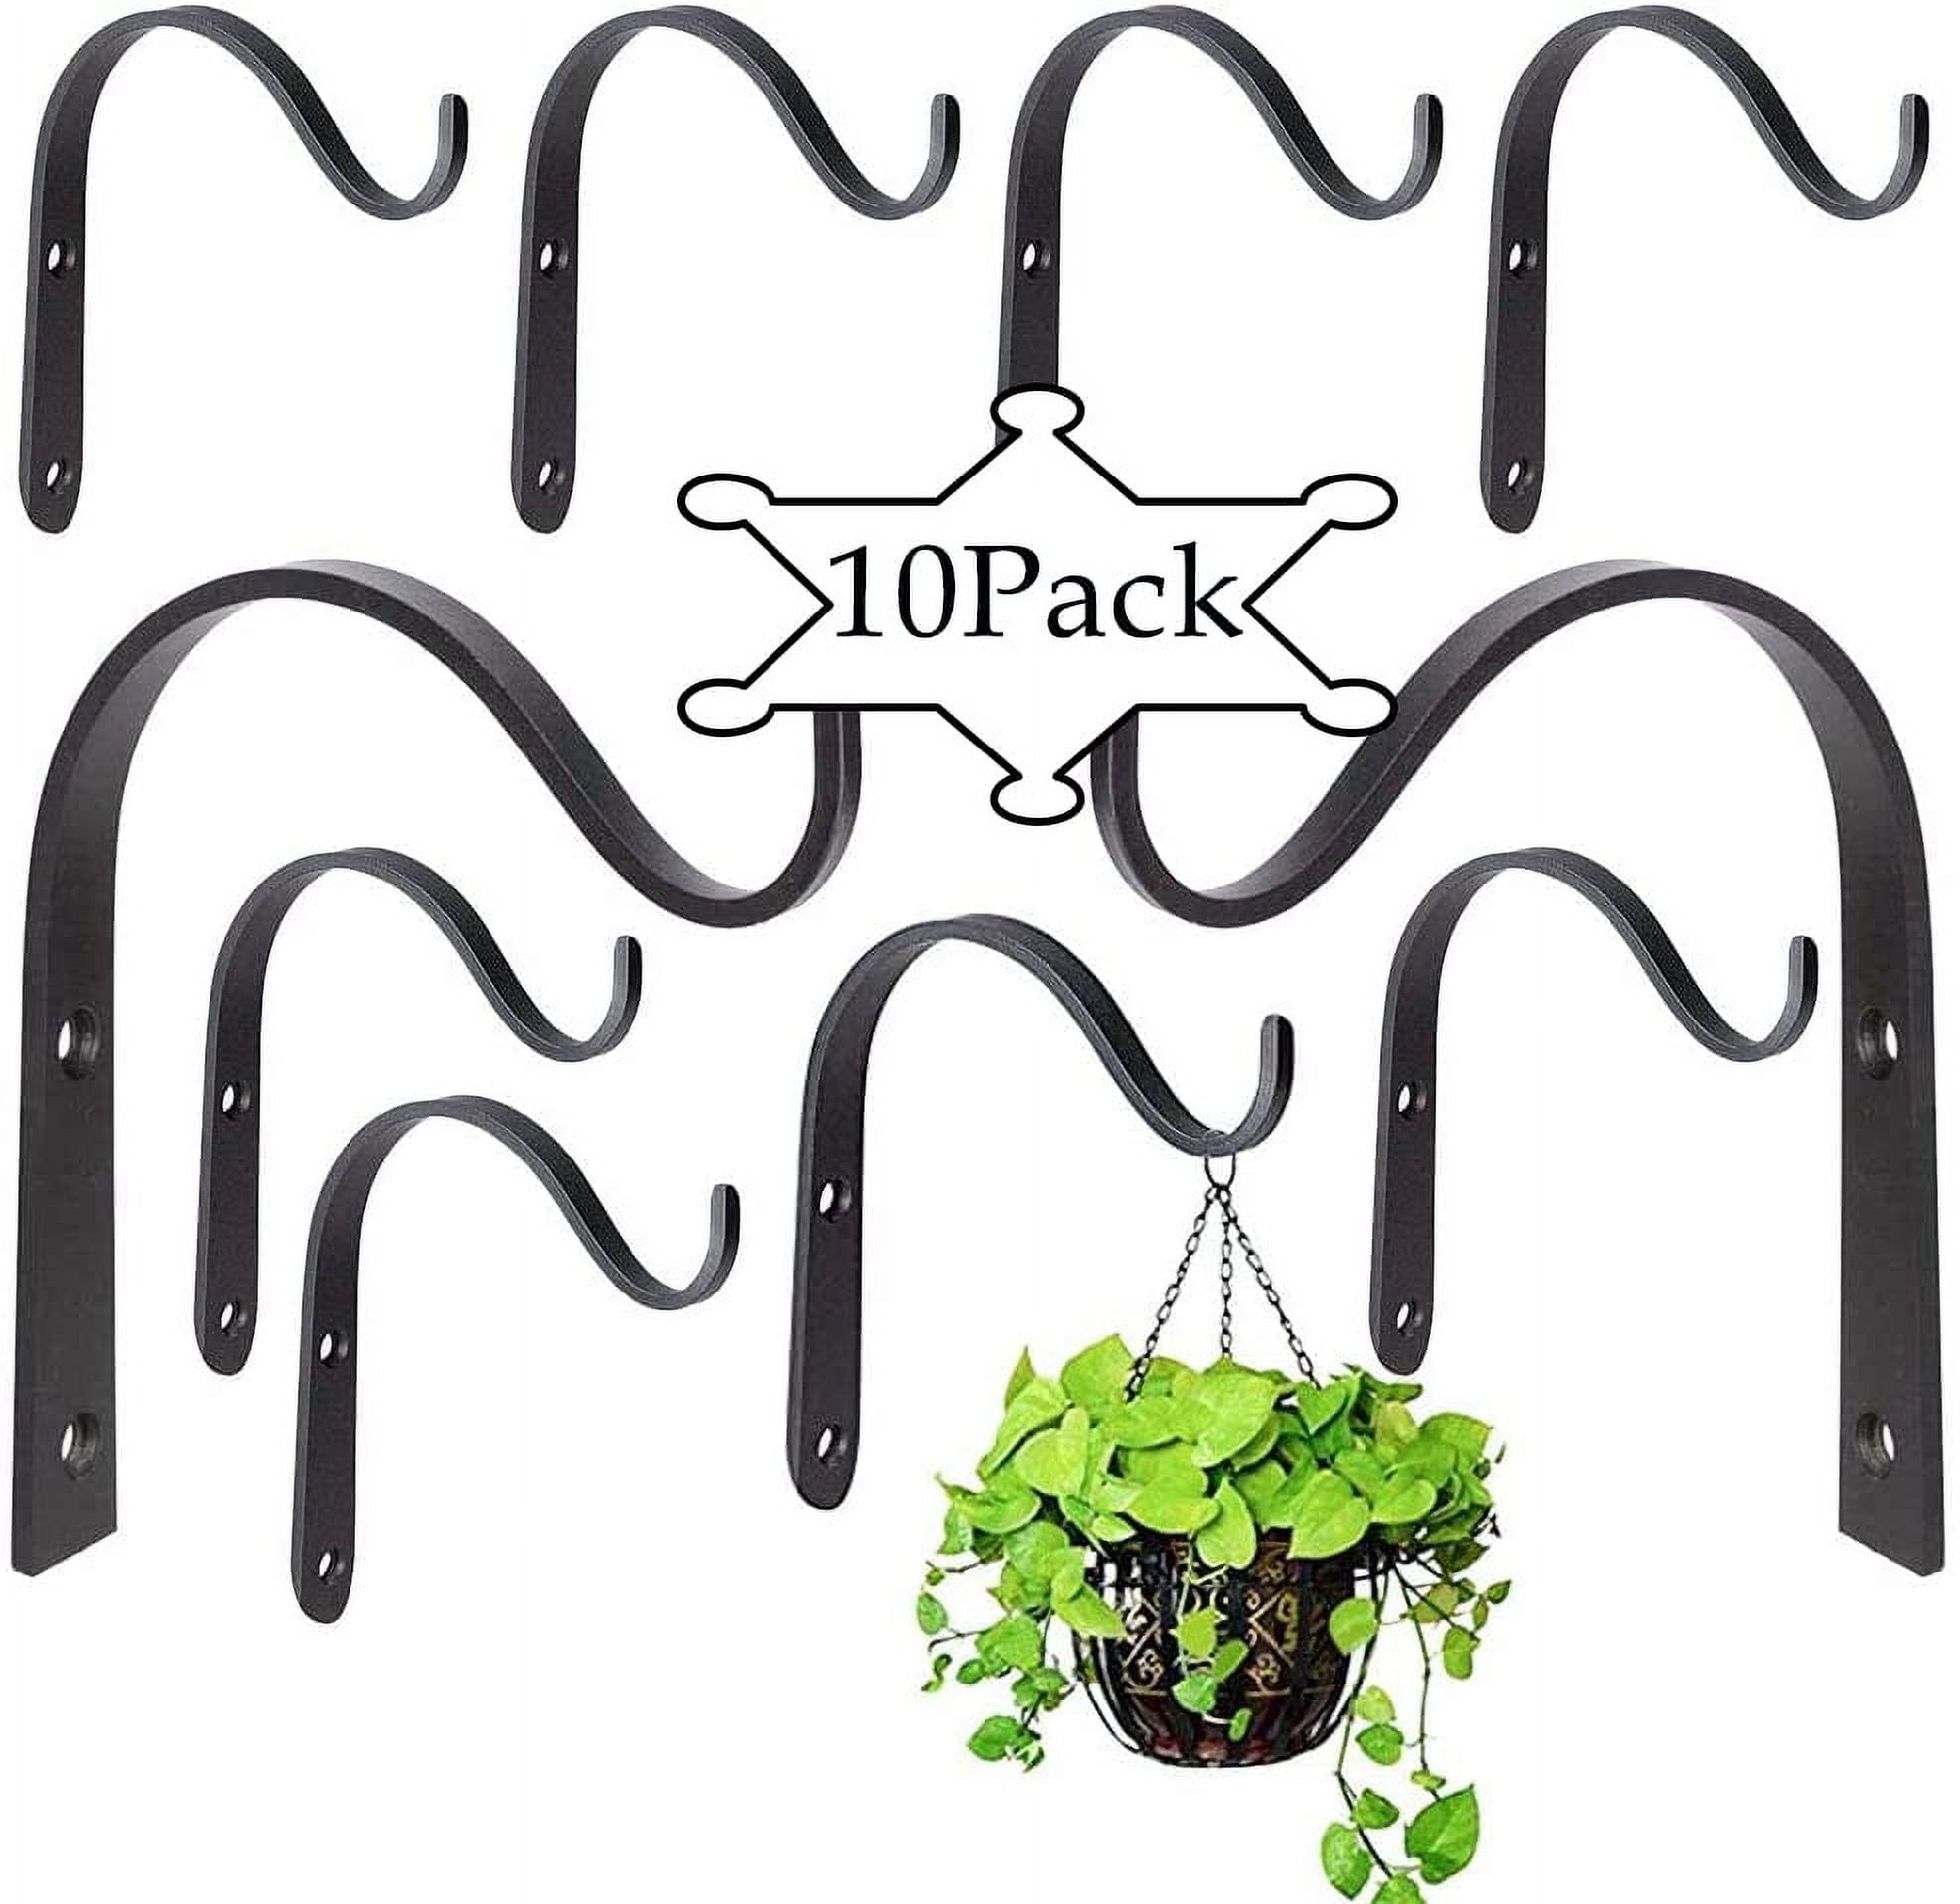 OUSITAI Iron Wall Hooks Metal Lantern Bracket Decorative Coat Hook for  Hanging Lantern,Bird Feeders,Wind Chimes,Plant Planter,Coat, Indoor Outdoor  Rustic Home Decor,10Pack,1.6 Inches 